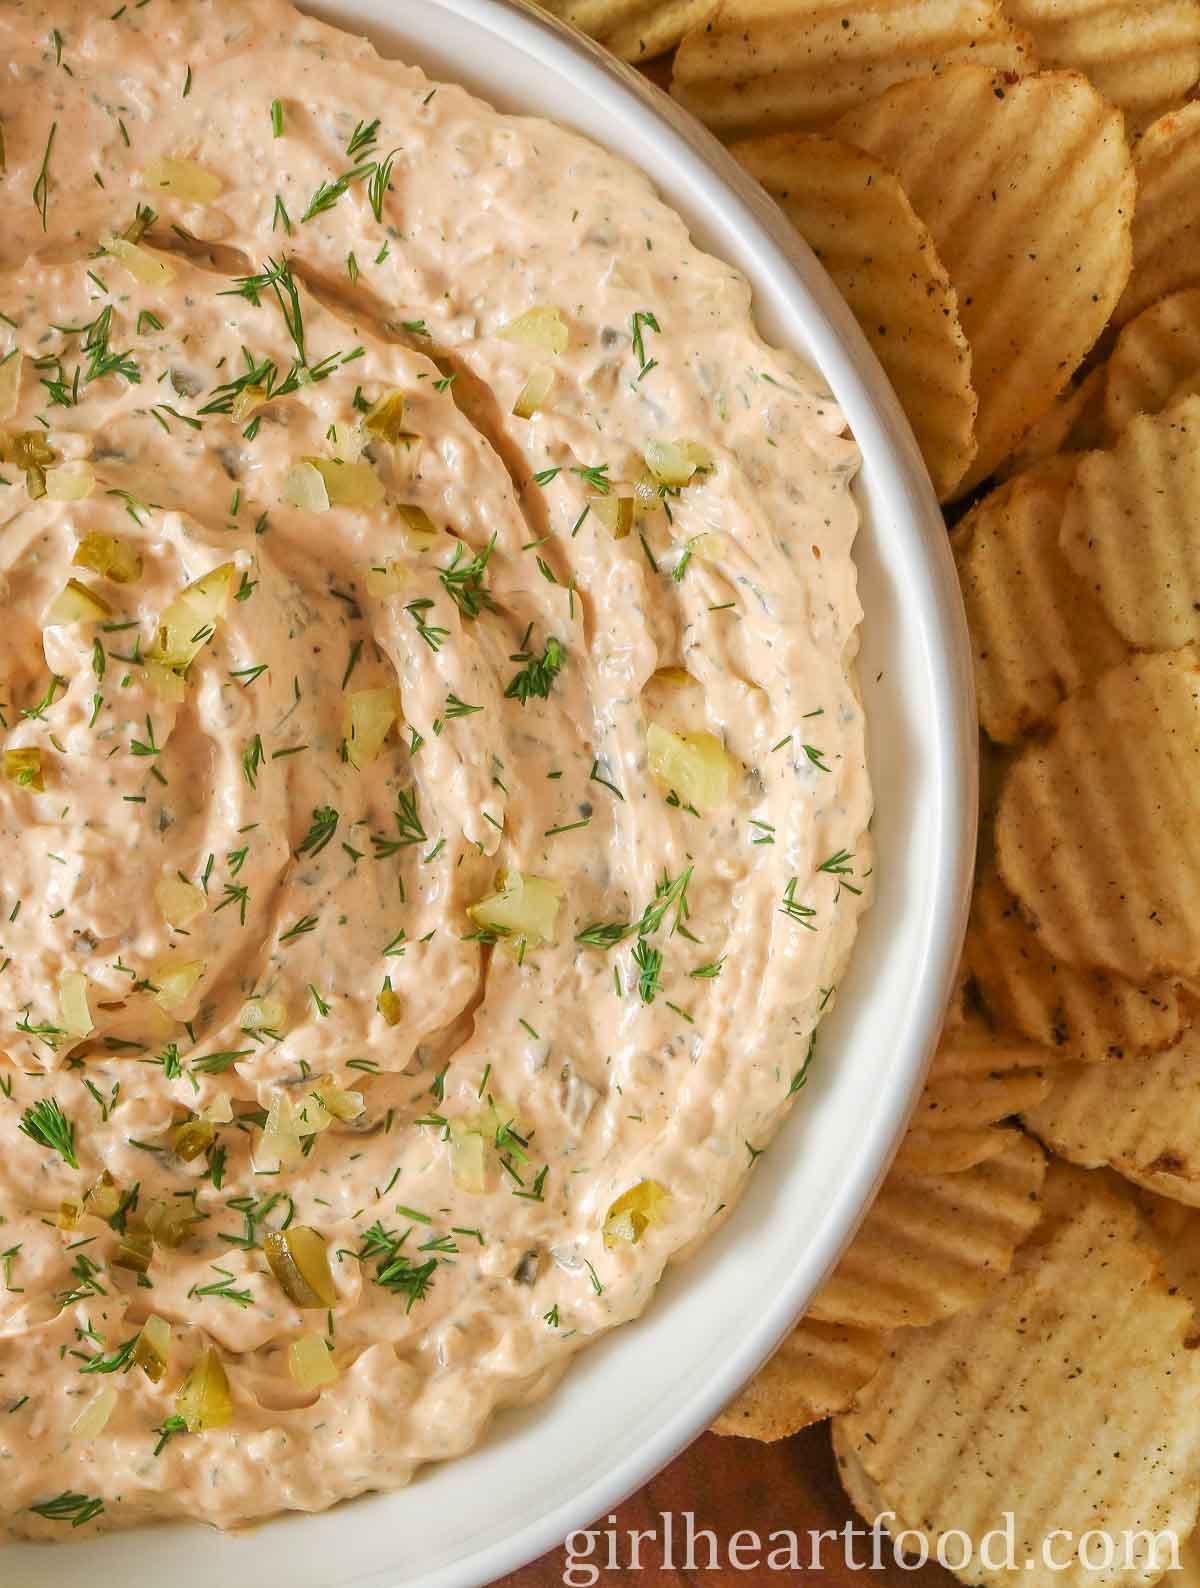 Close-up of a bowl of dill pickle dip alongside potato chips.